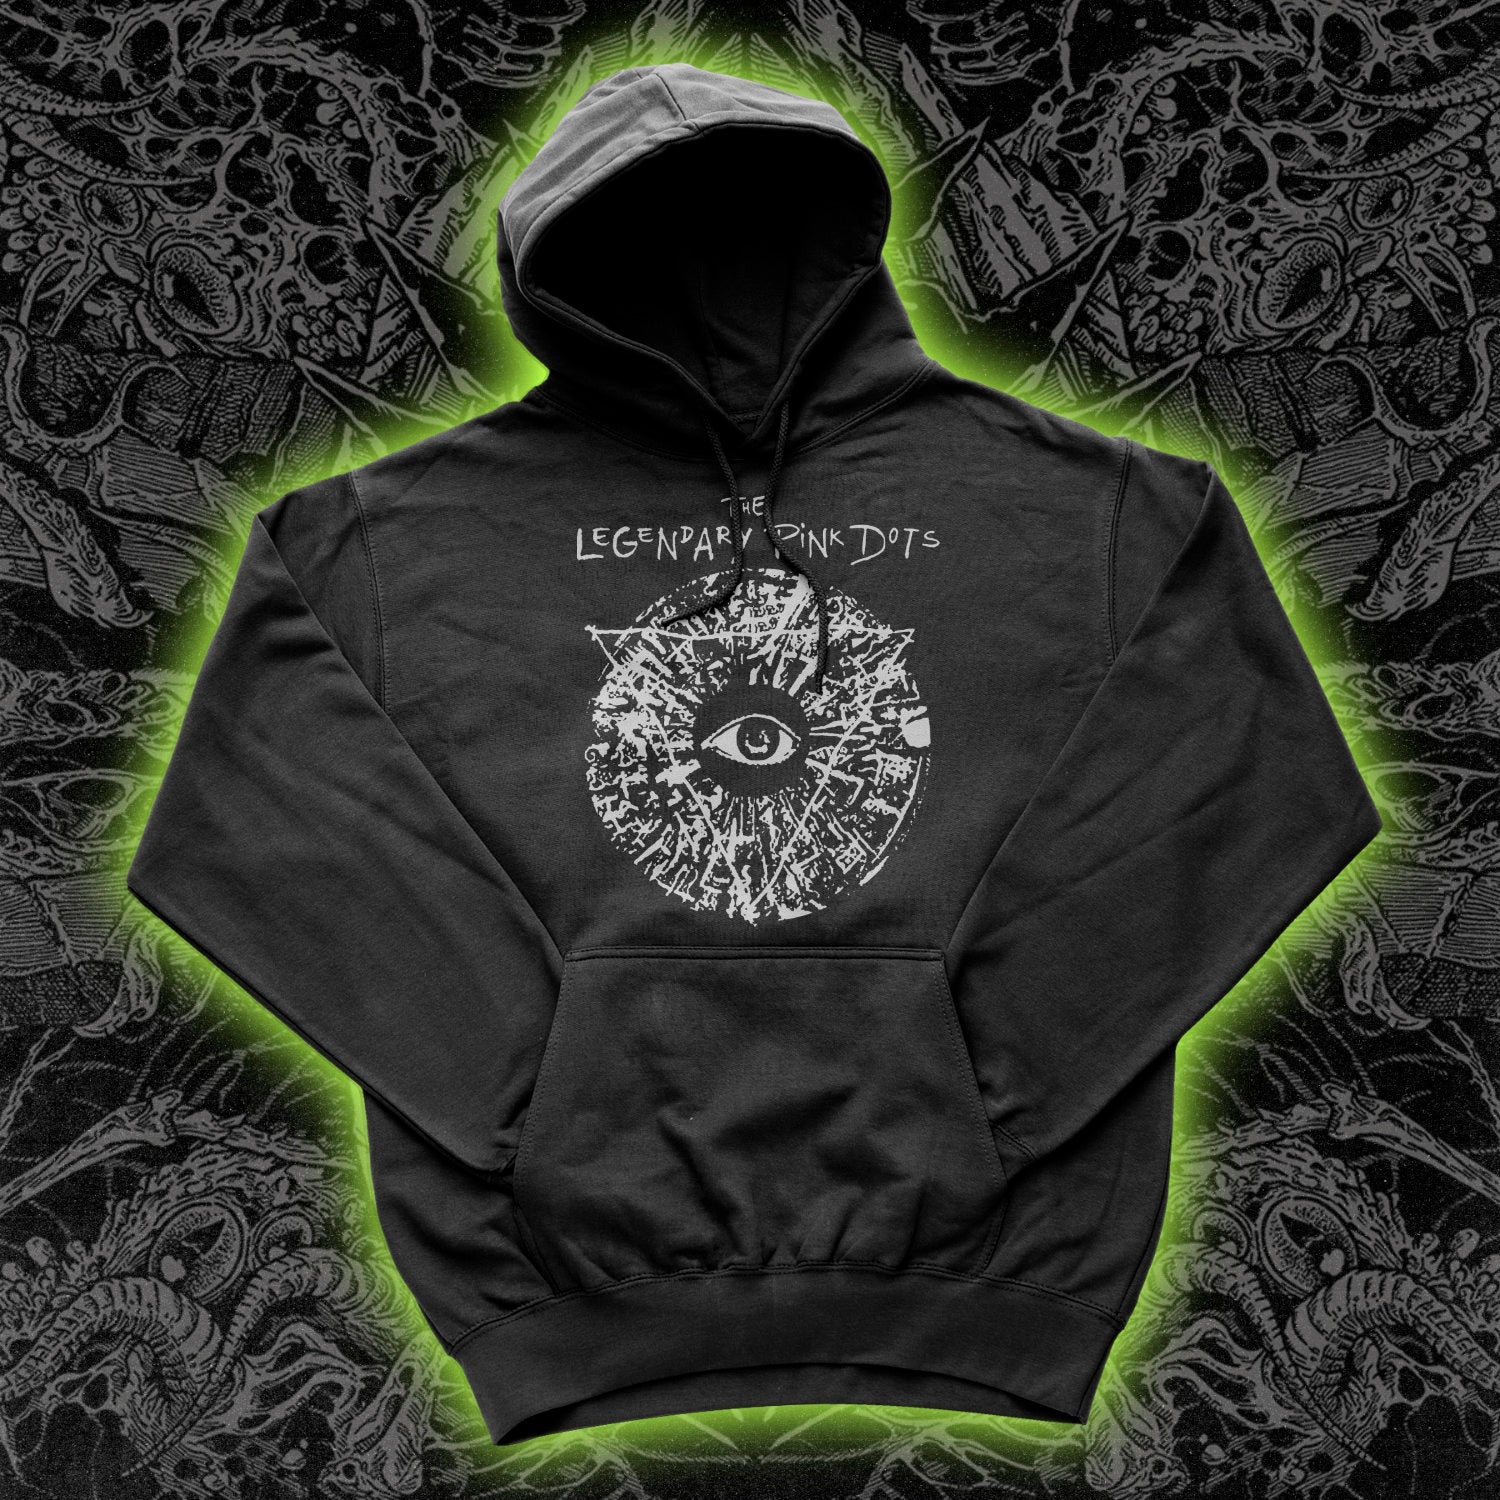 The Legendary Pink Dots Hoodie